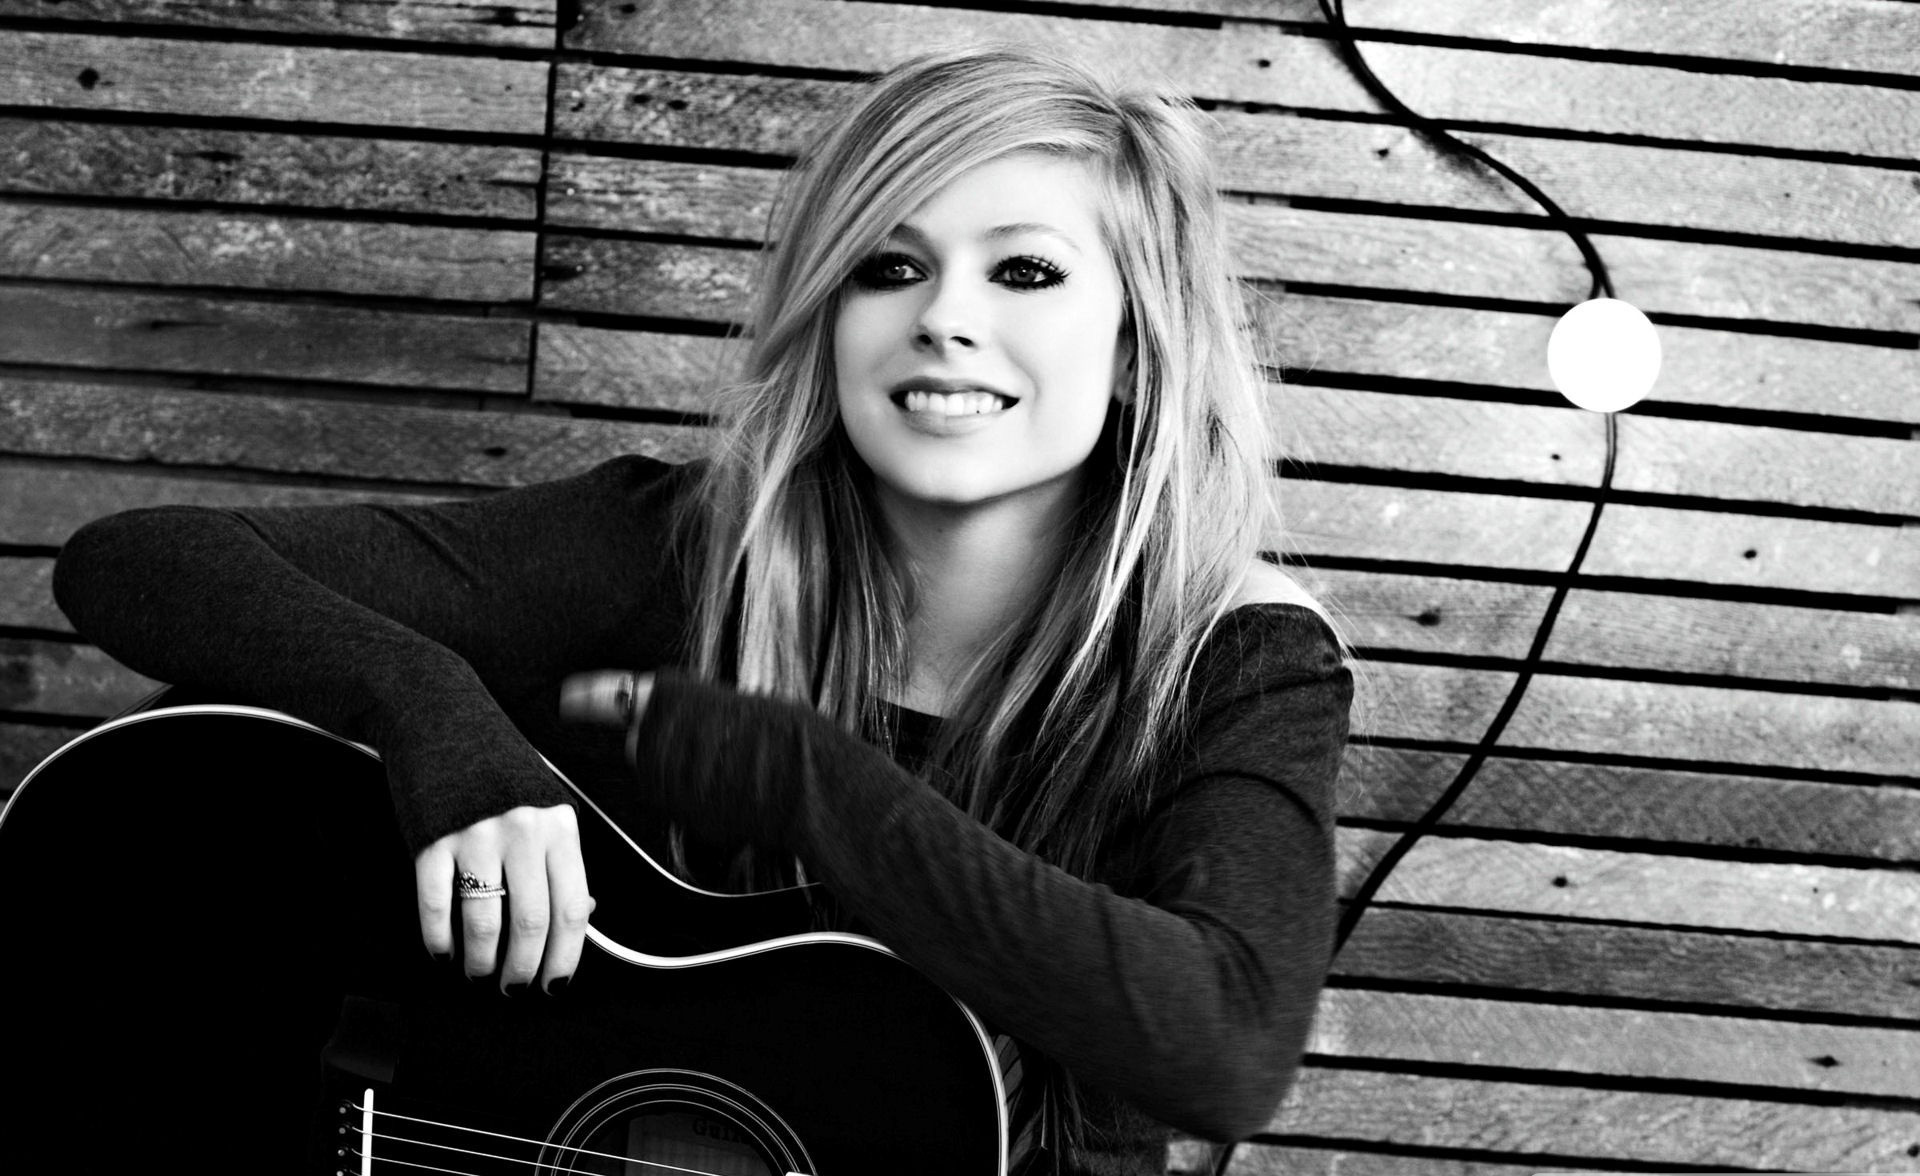 19x Avril Lavigne Hd Wallpapers 19x Resolution Wallpaper Hd Celebrities 4k Wallpapers Images Photos And Background Wallpapers Den